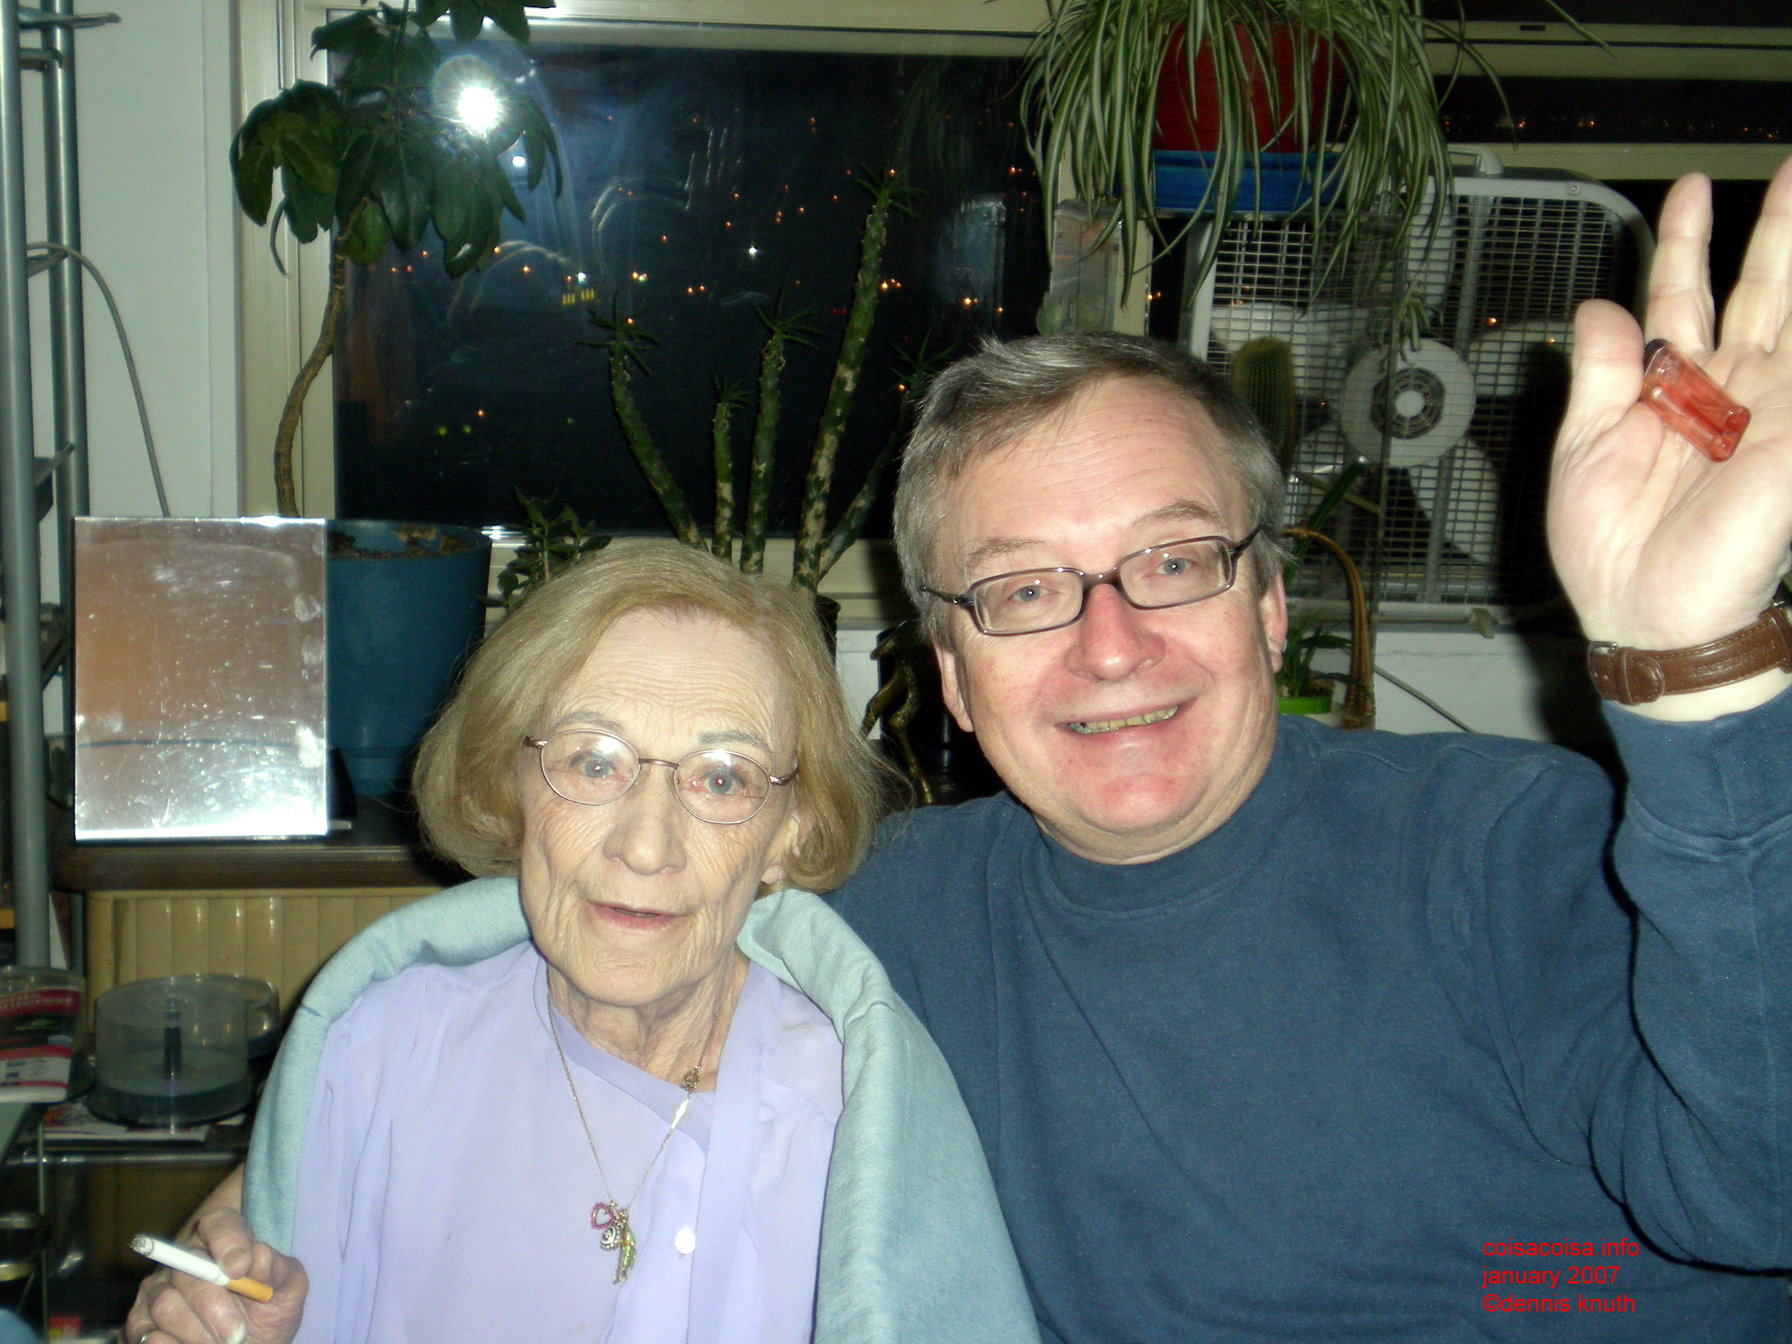 Dennis Knuth and Olga at her birthday party